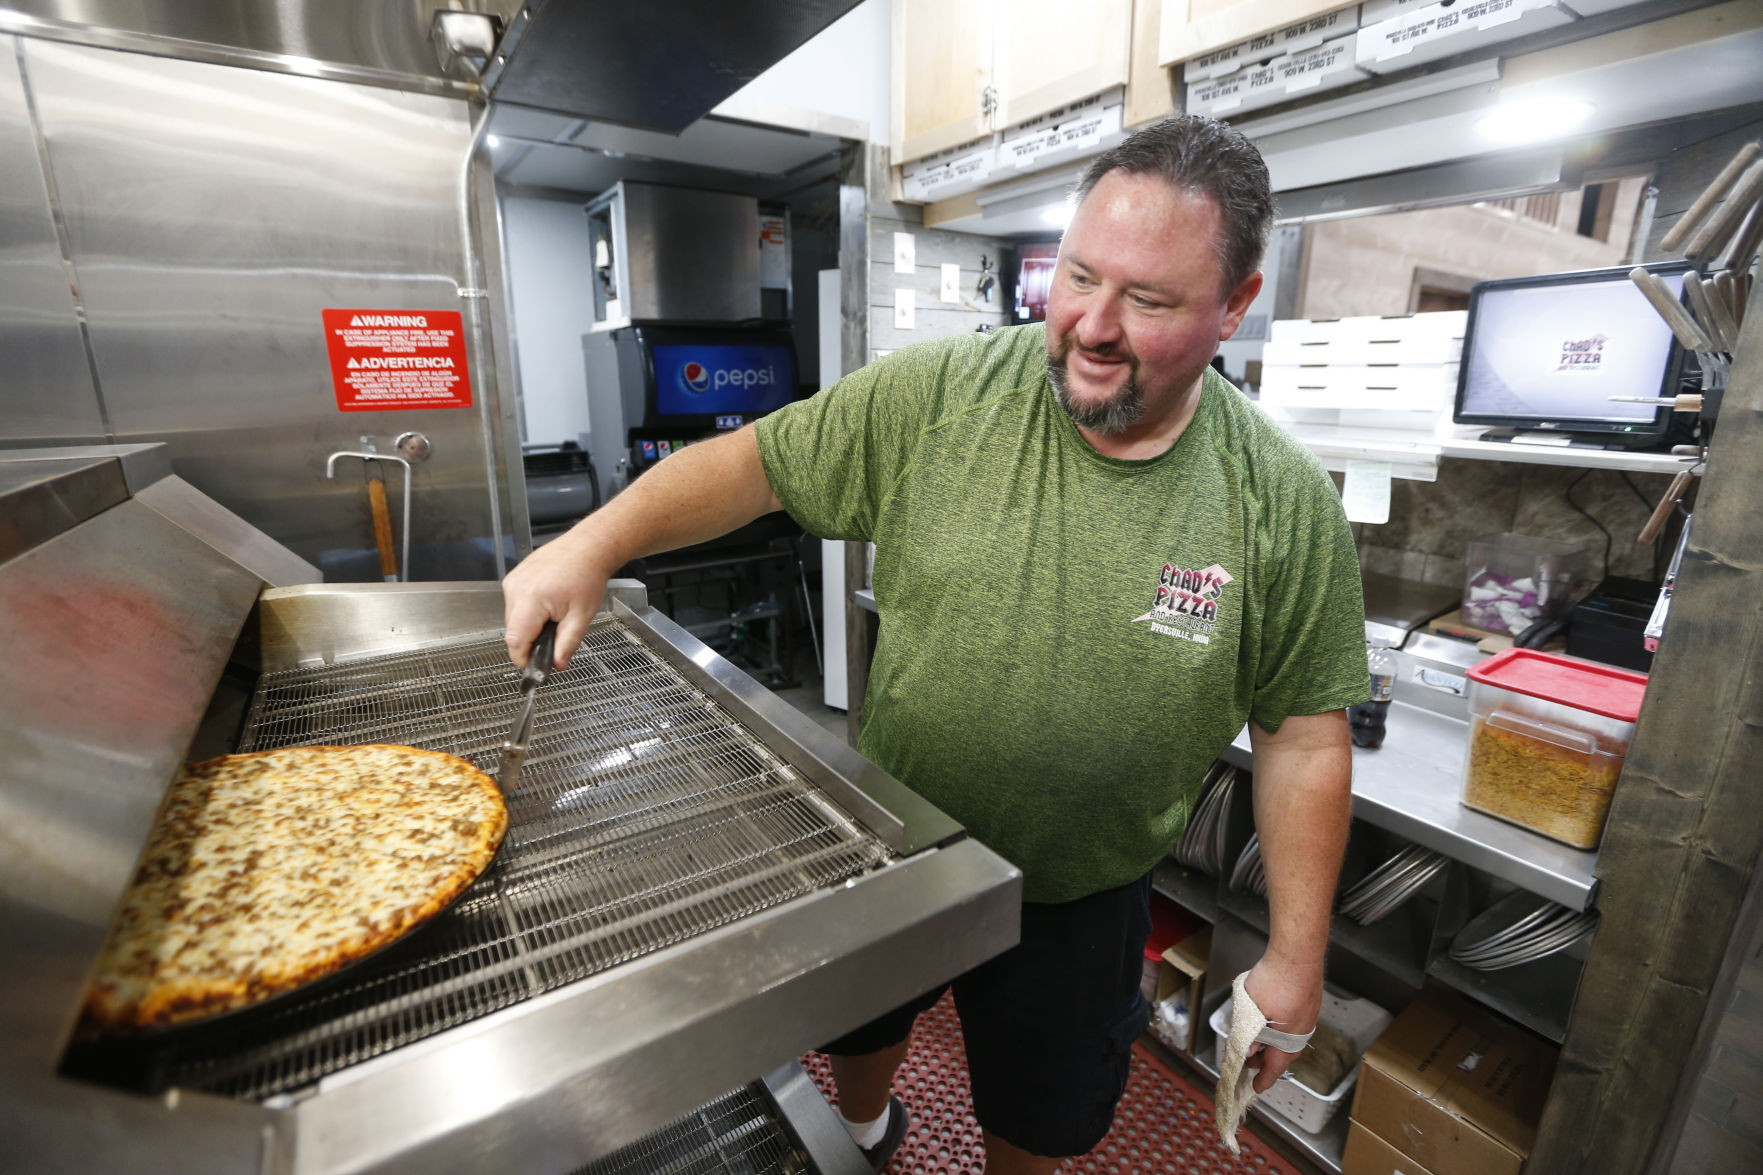 Chad’s Pizza owner Chad Clouse checks a pizza Friday in his new oven that is part of the Dyersville, Iowa, restaurant’s renovation. Clouse said the project will be finished and the dining room reopened in mid-August. PHOTO CREDIT: Dave Kettering